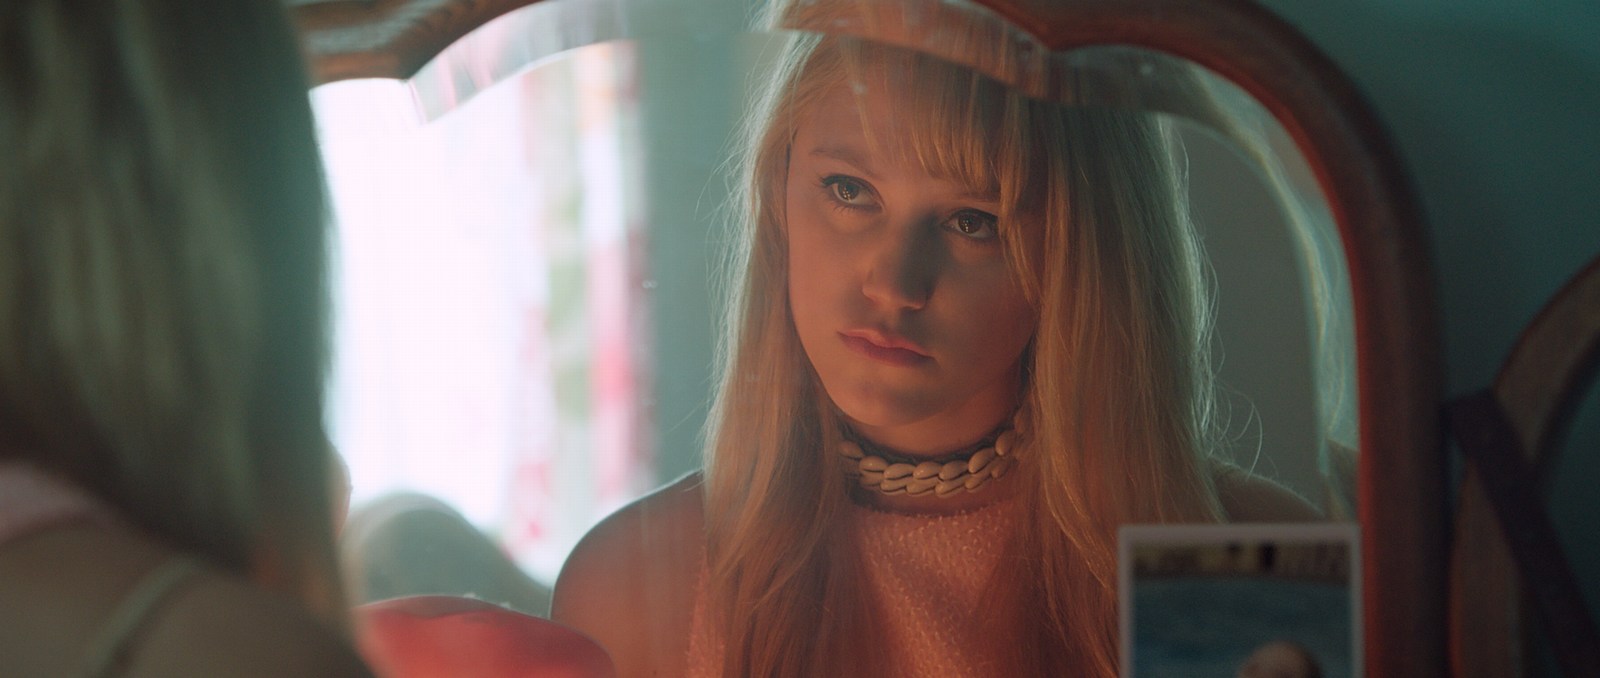 It Follows Pulls the Viewer to the Verge of Paranoia